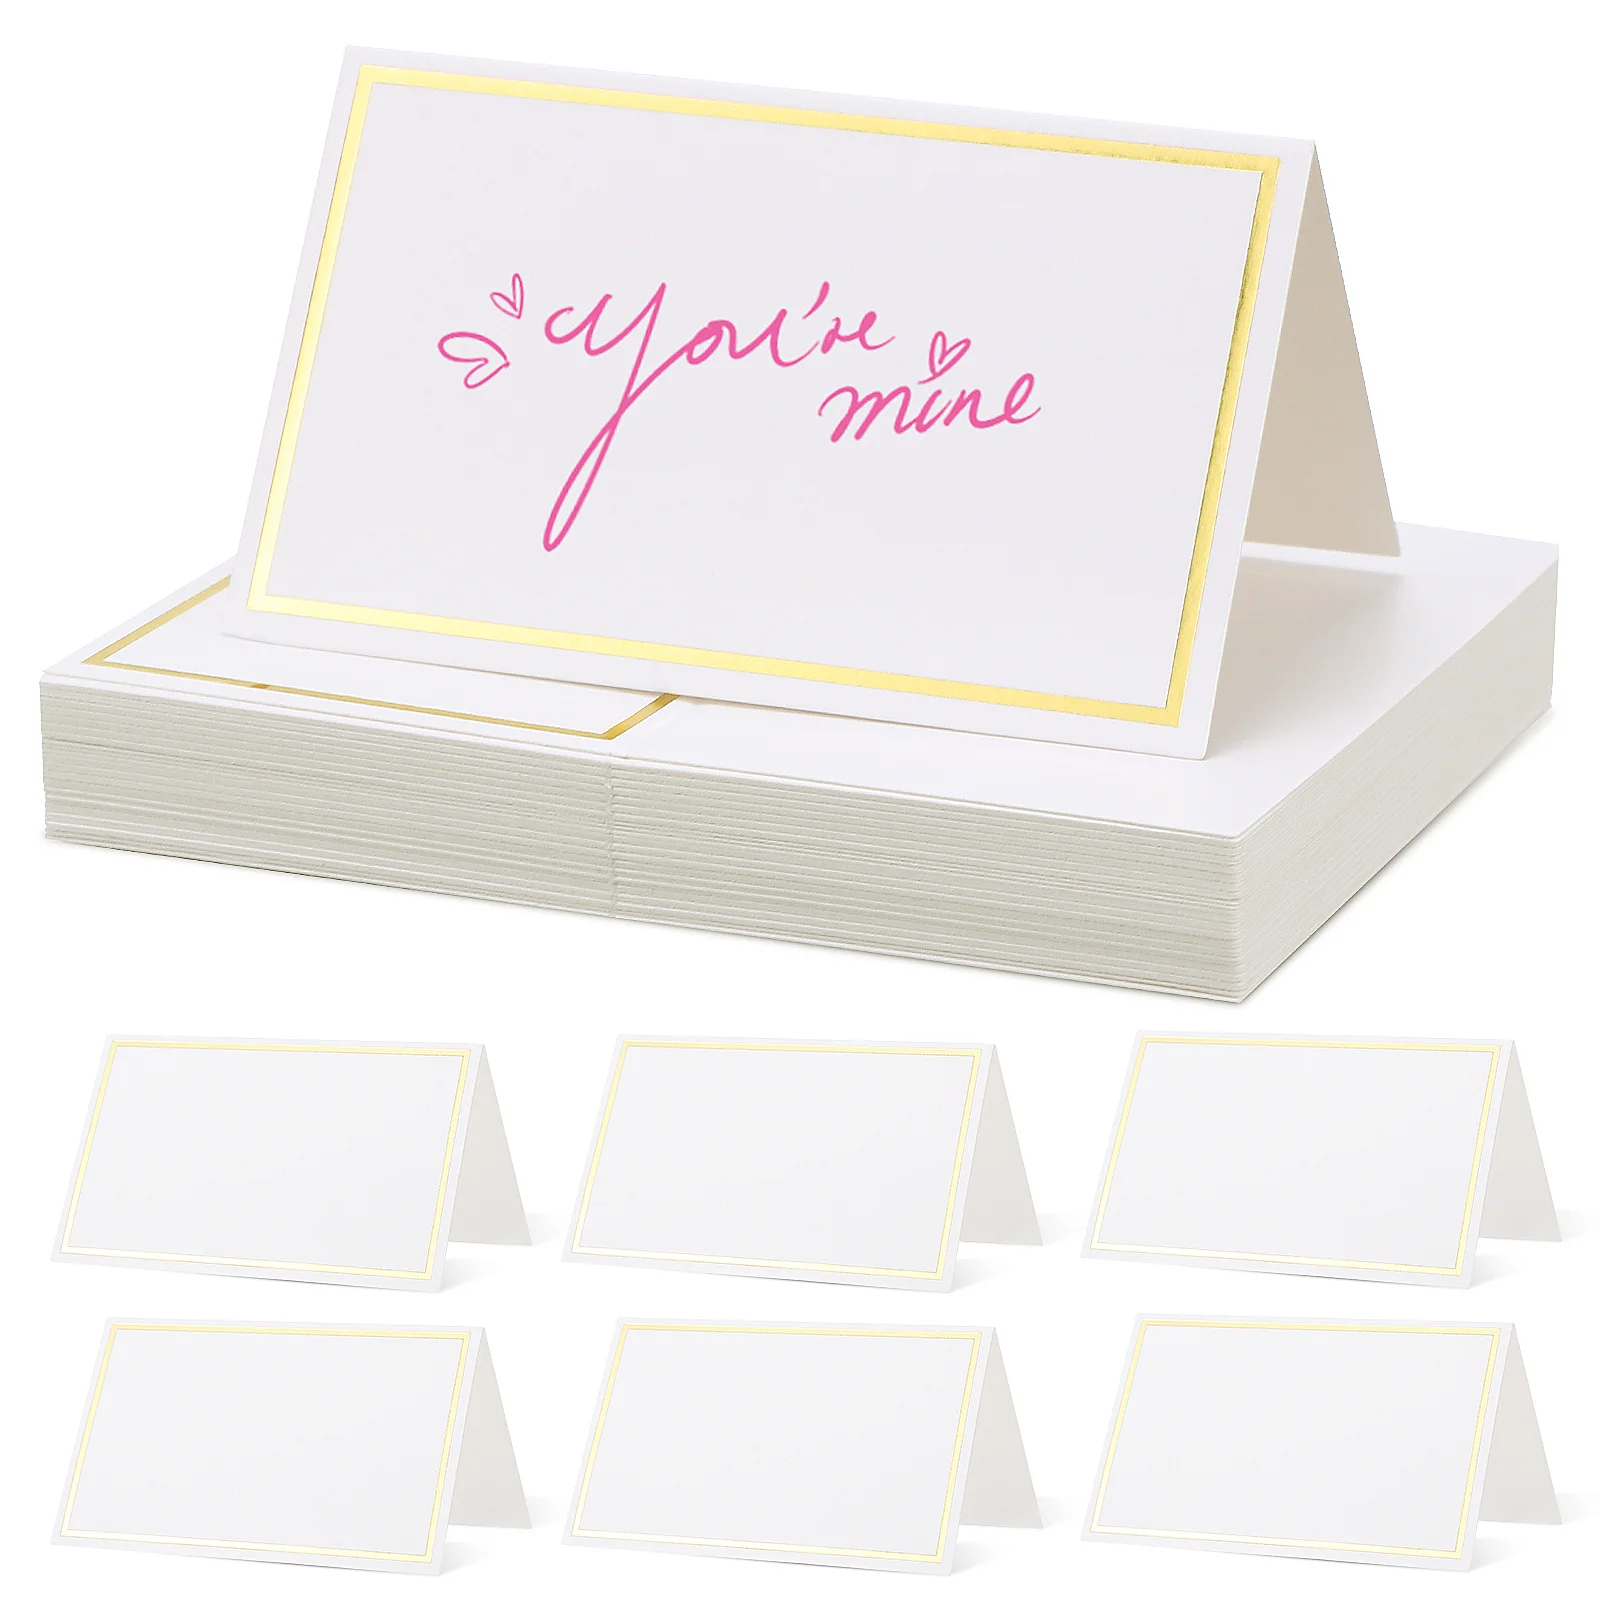 

40Pcs Place Cards Blank Table Name Place Cards with Gold Foil Stamping Border for Table Setting Reserved Seating